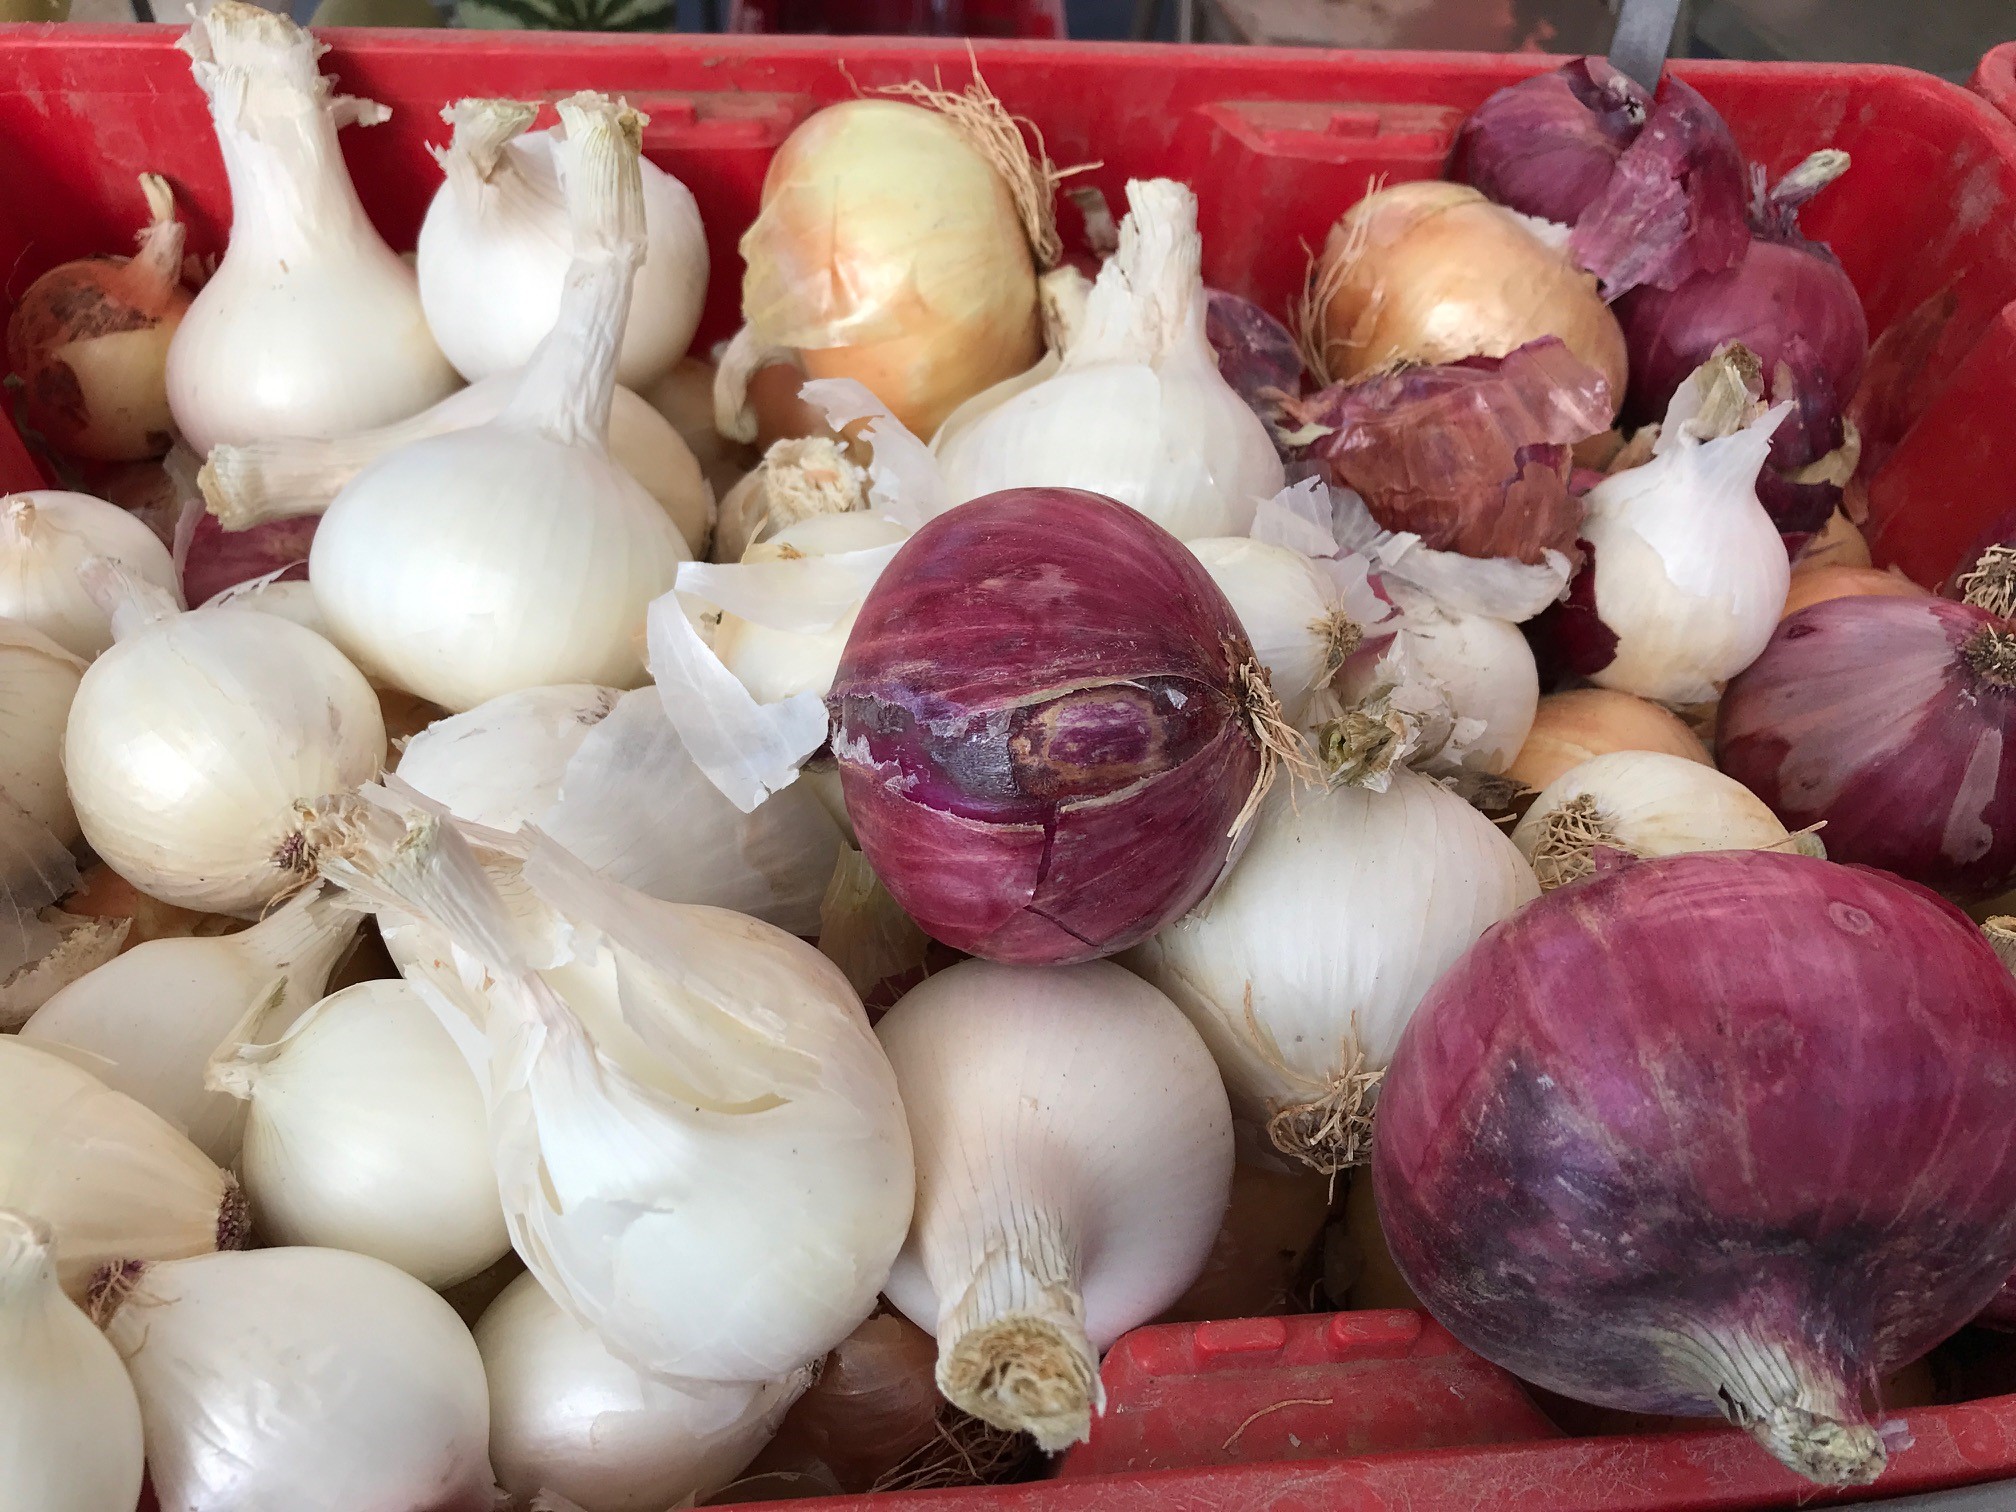 Box full of purple and white onions